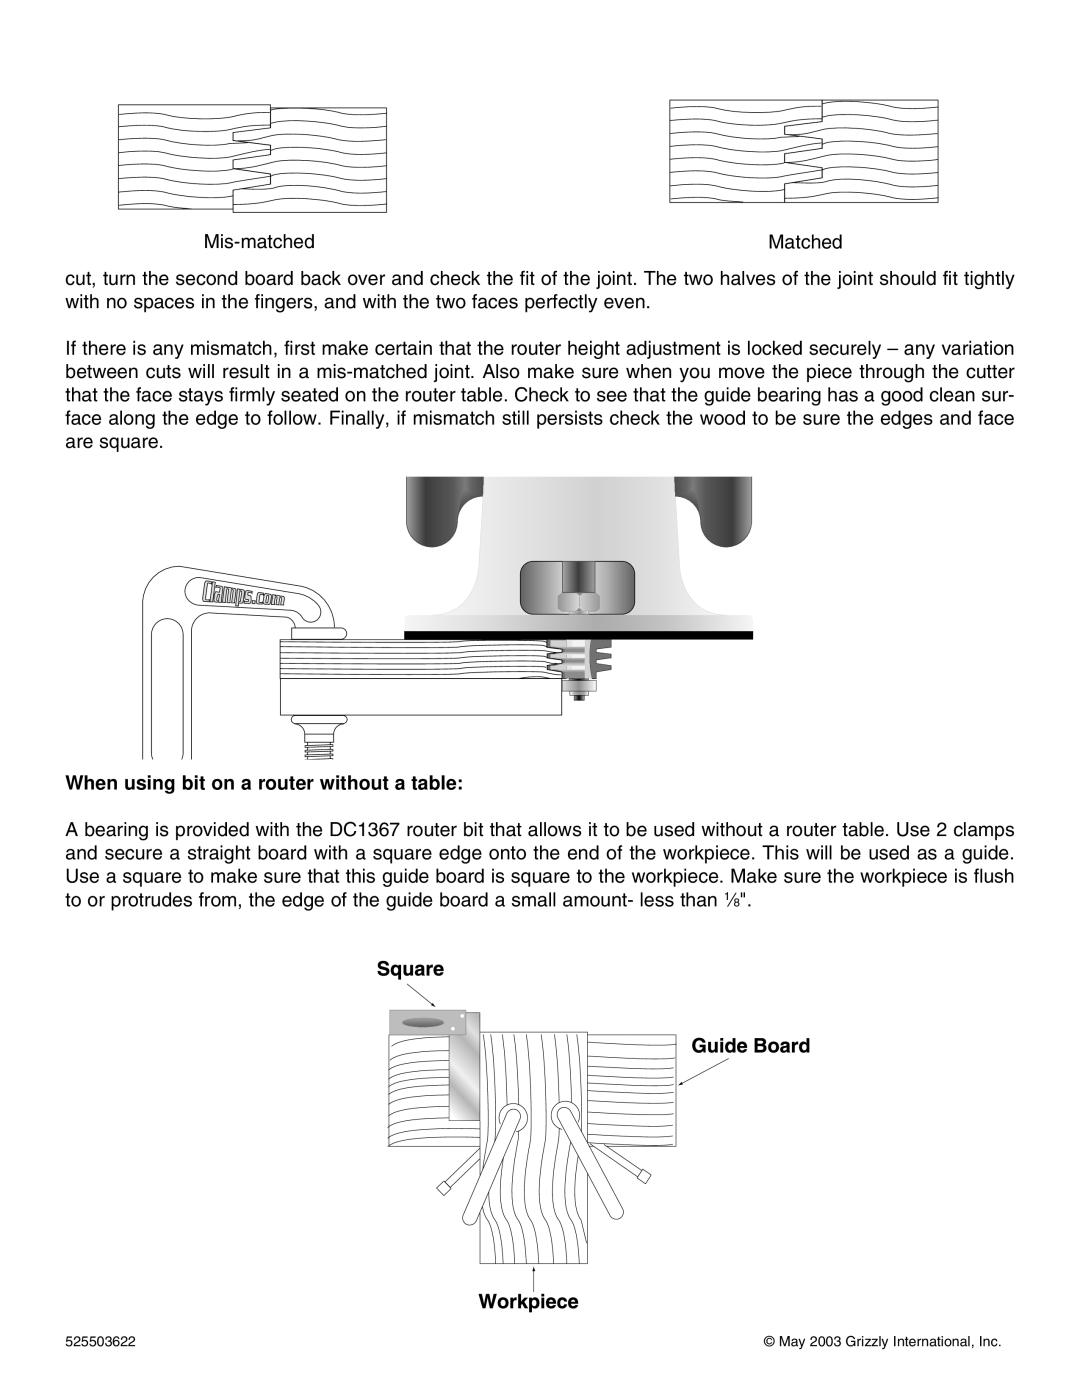 Grizzly C1367 manual When using bit on a router without a table 